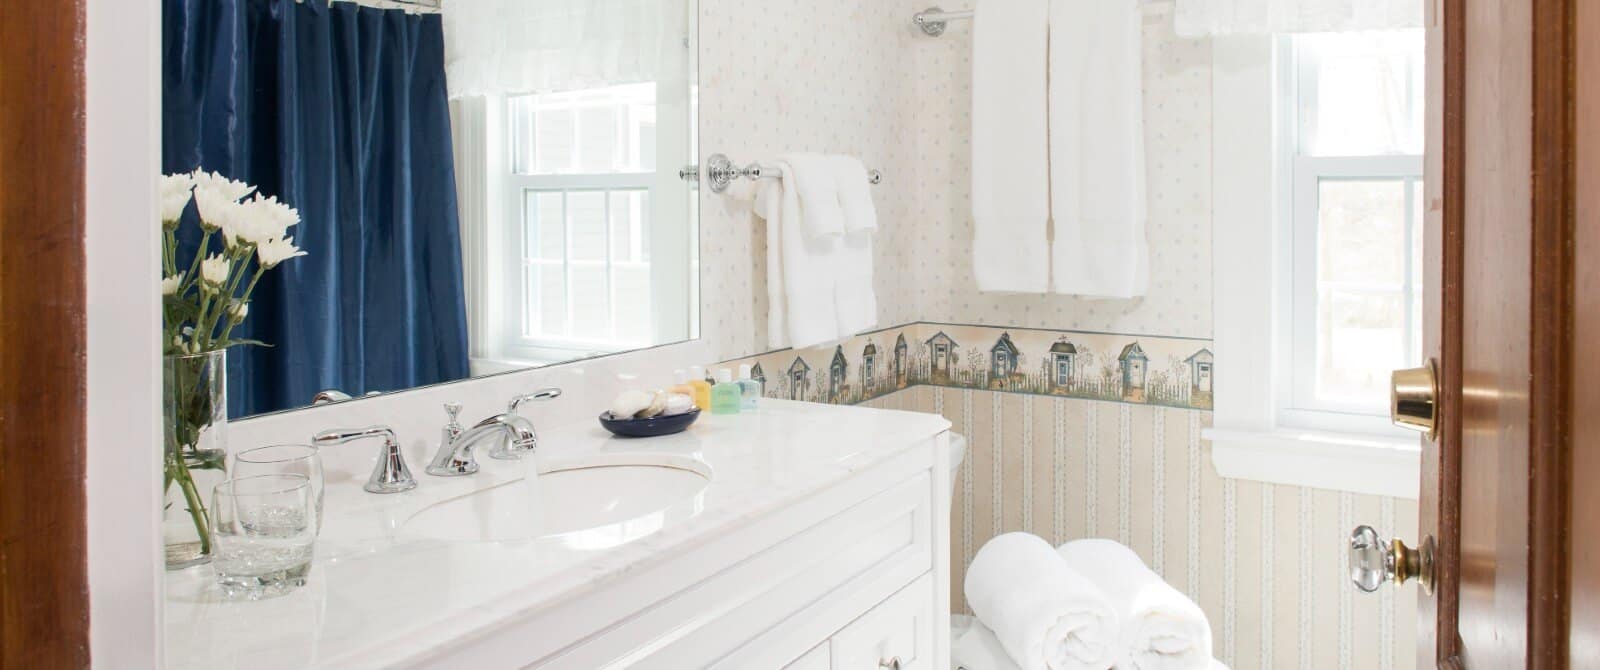 Bathroom with pale blue walls, vanity with framed mirror and white hanging towels